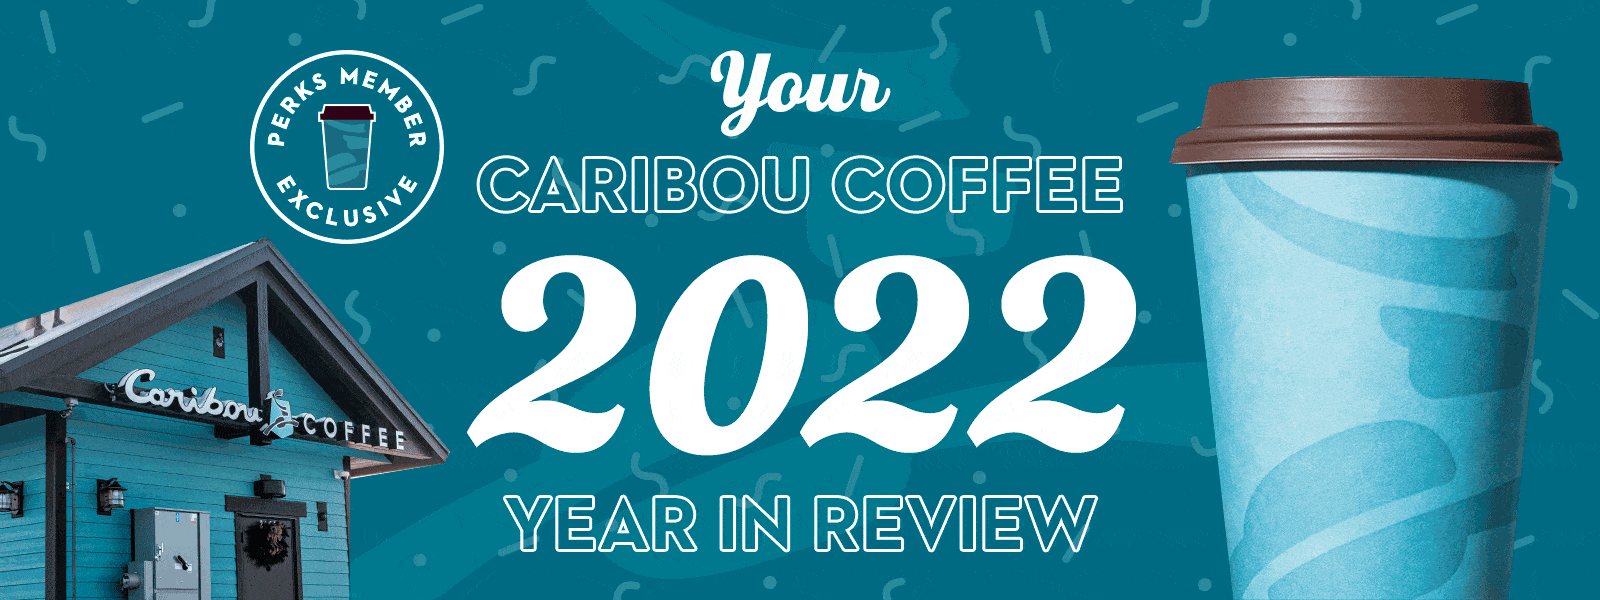 Your Caribou Coffee 2022 Year in Review